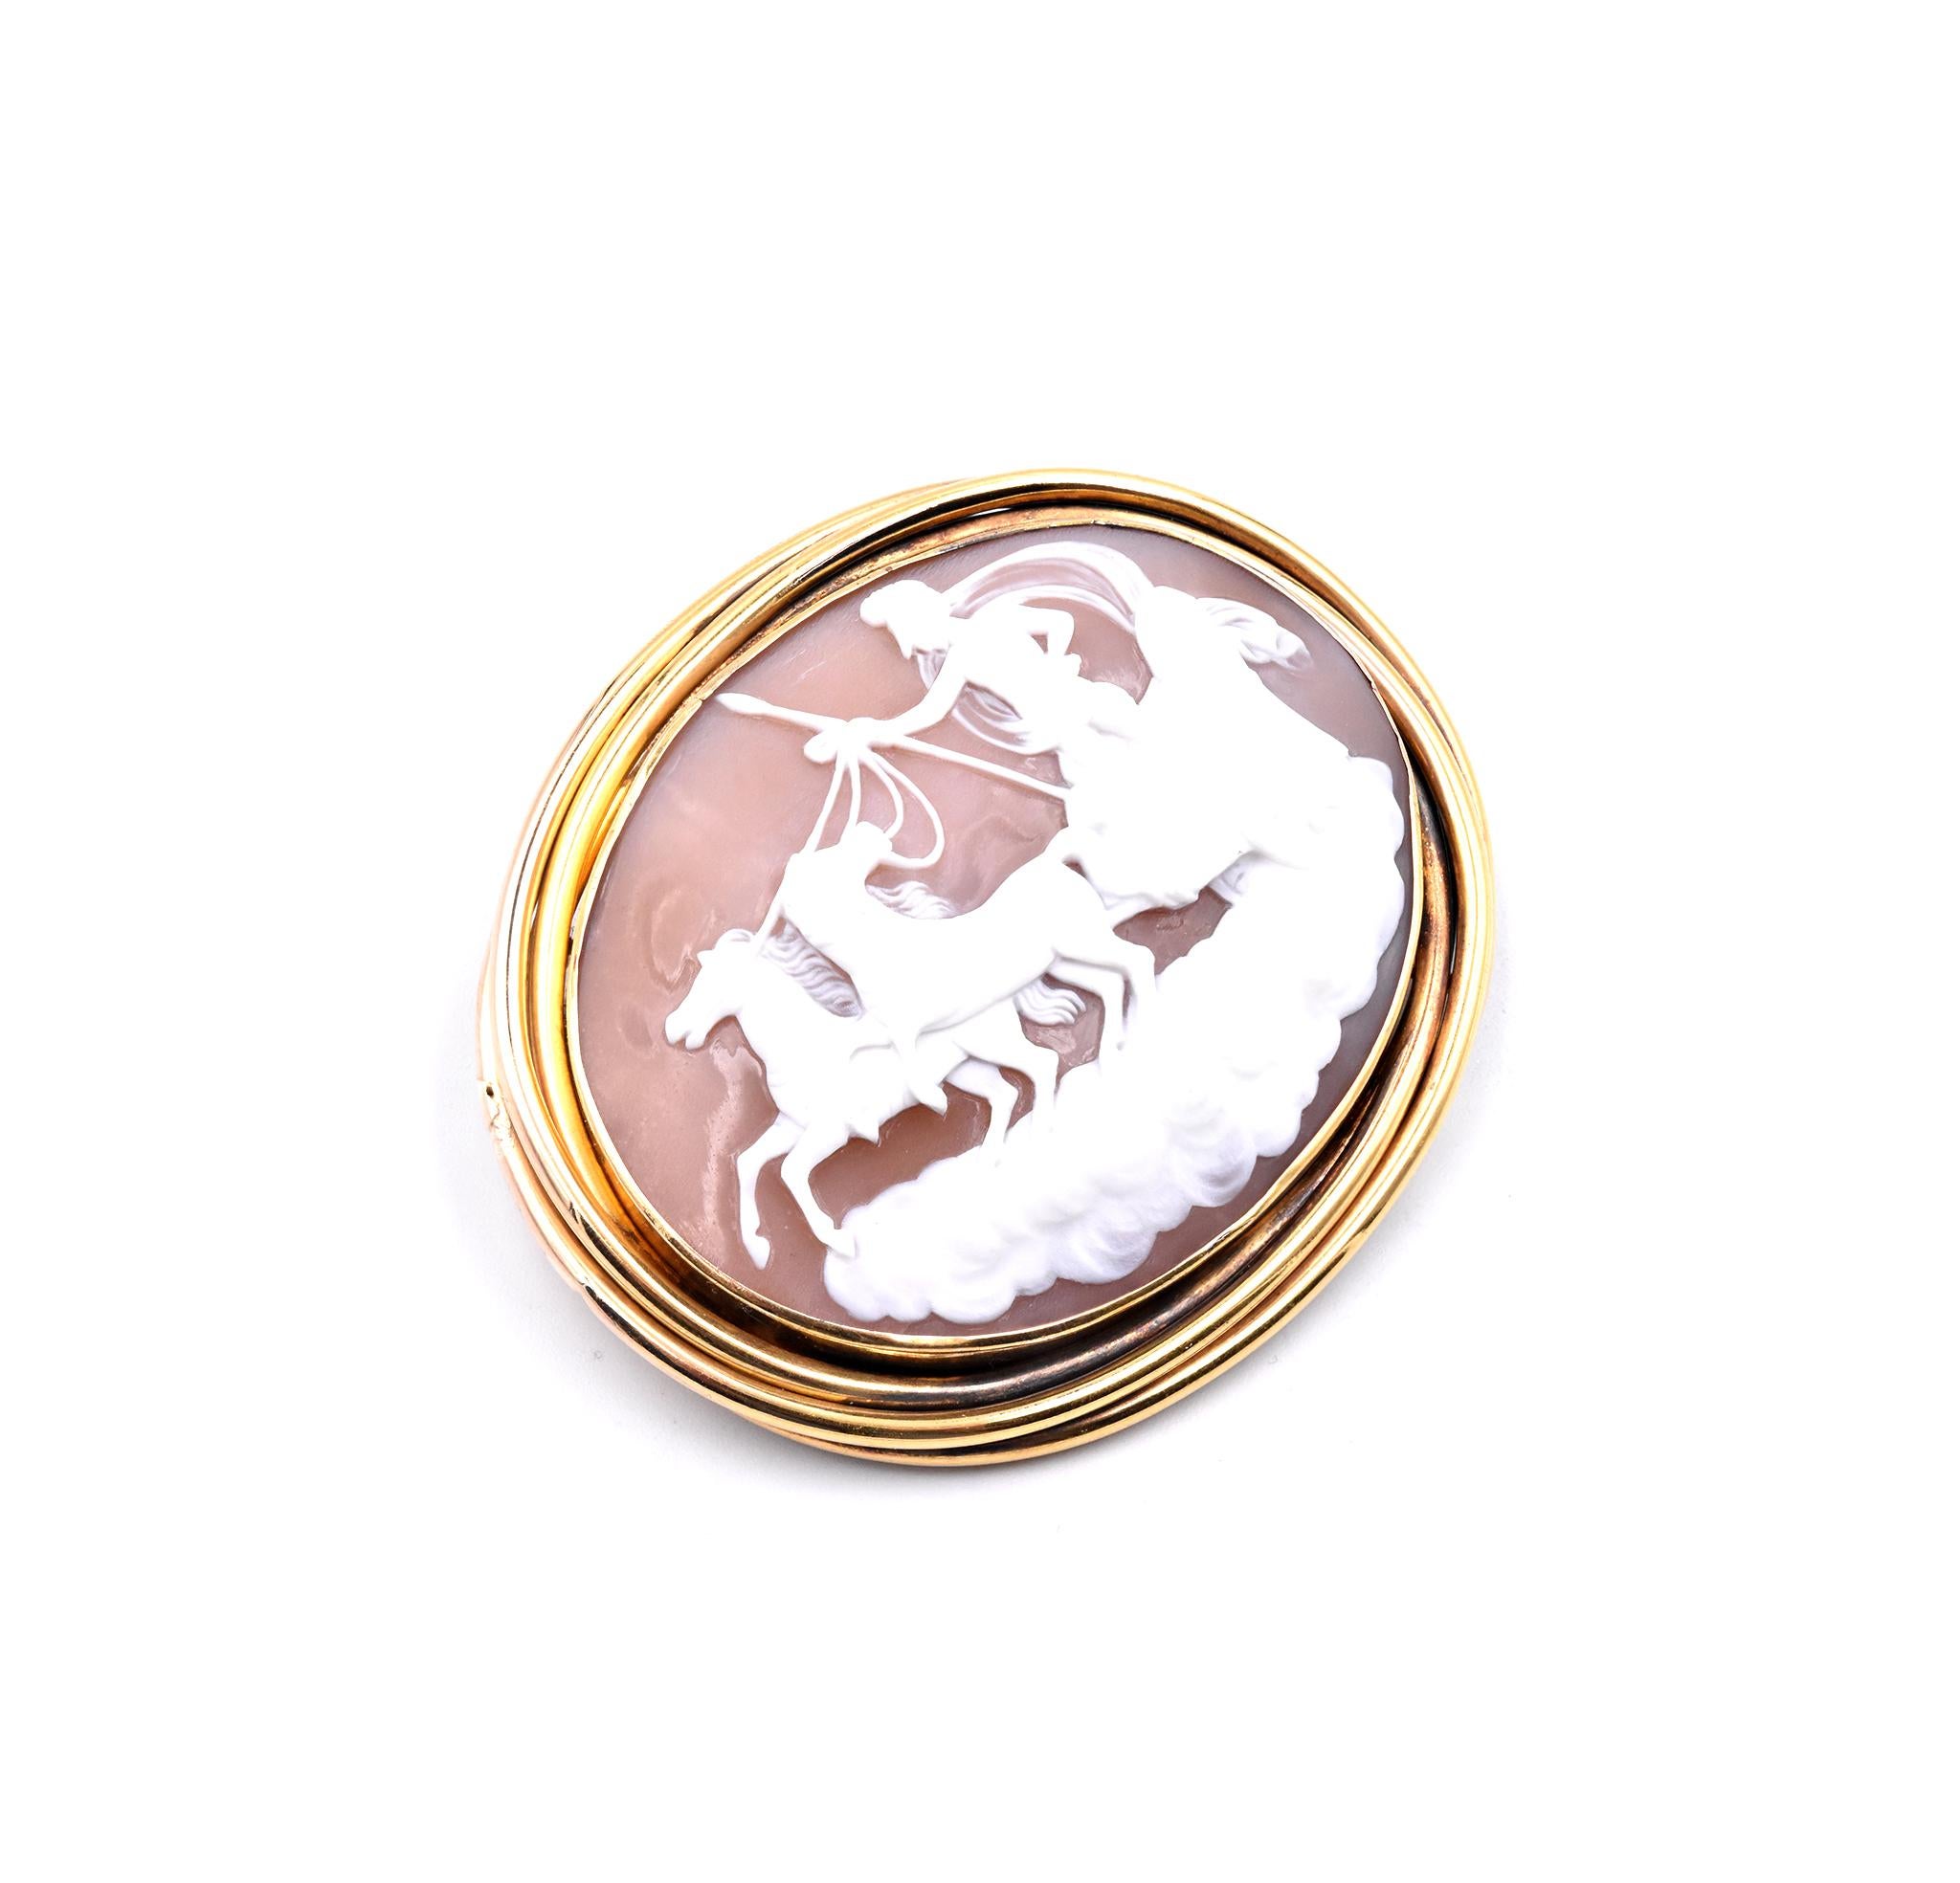 14/18 Karat Yellow Gold Chariot Cameo Pin In Excellent Condition For Sale In Scottsdale, AZ